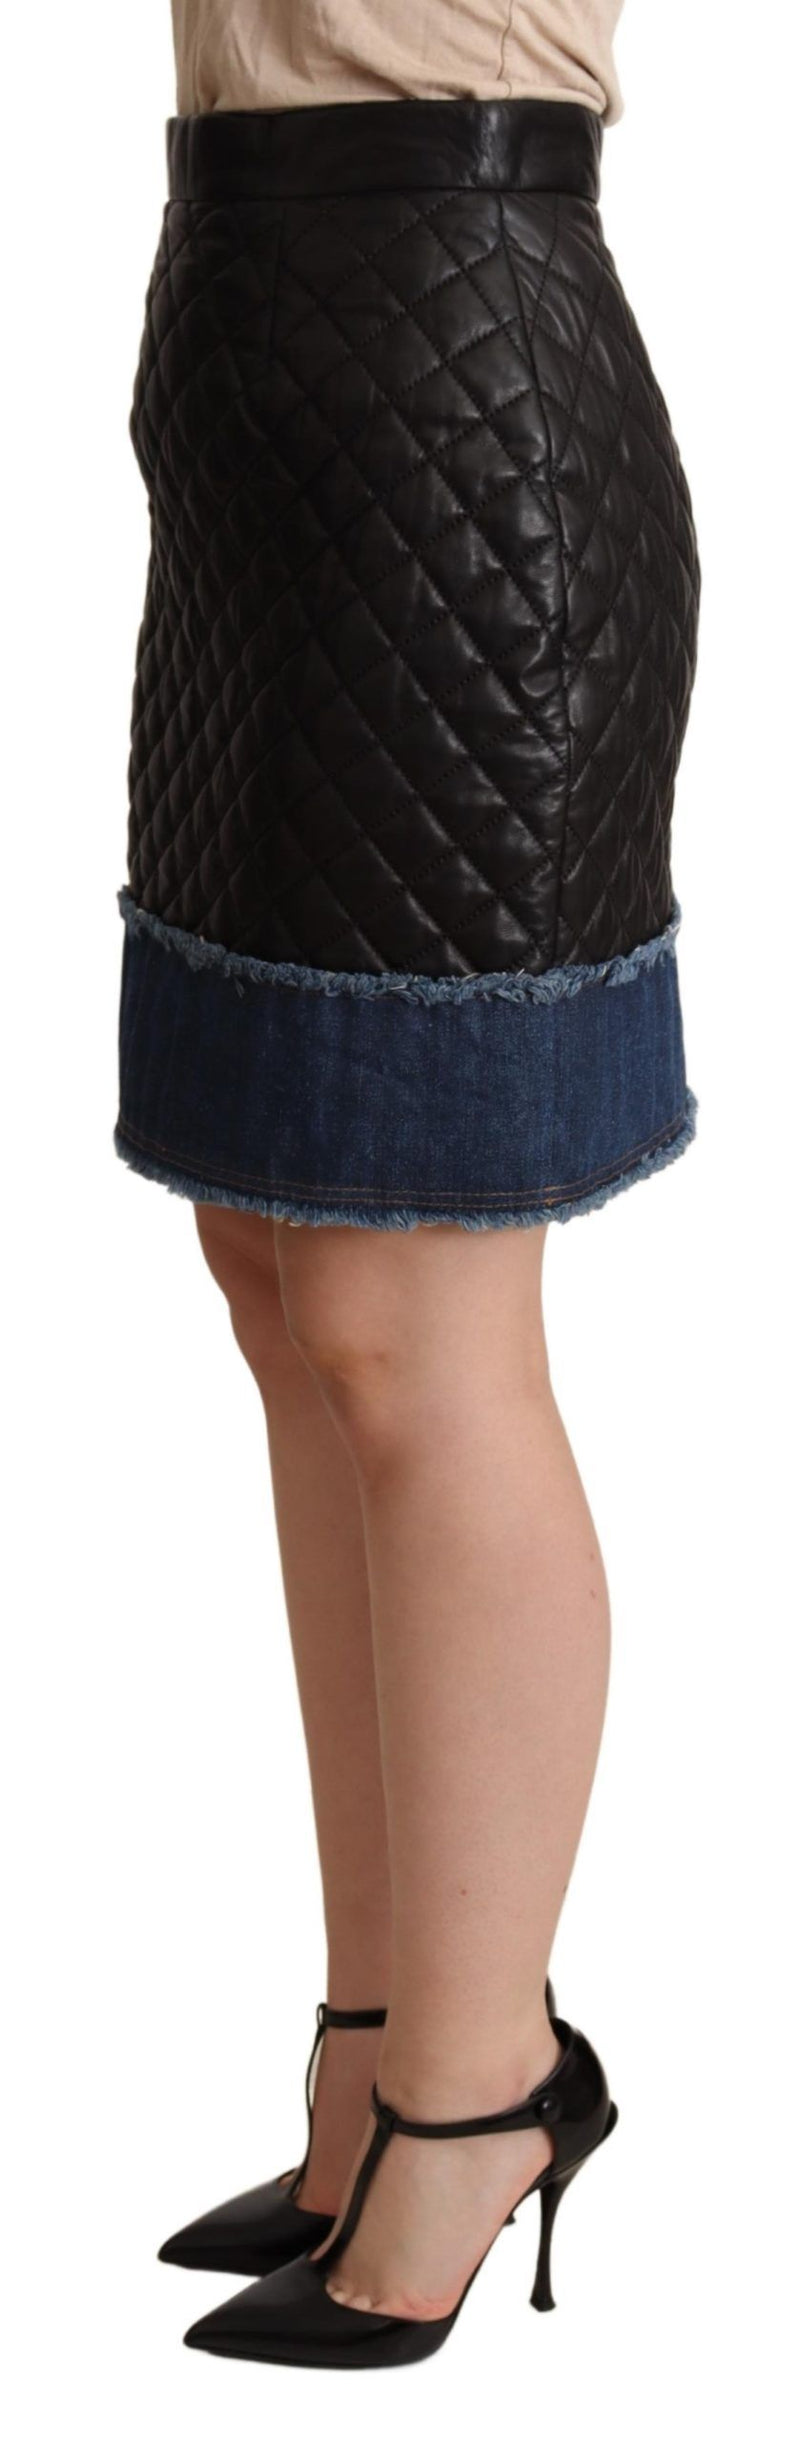 Dolce & Gabbana Black Quilted Leather Mini Women's Skirts